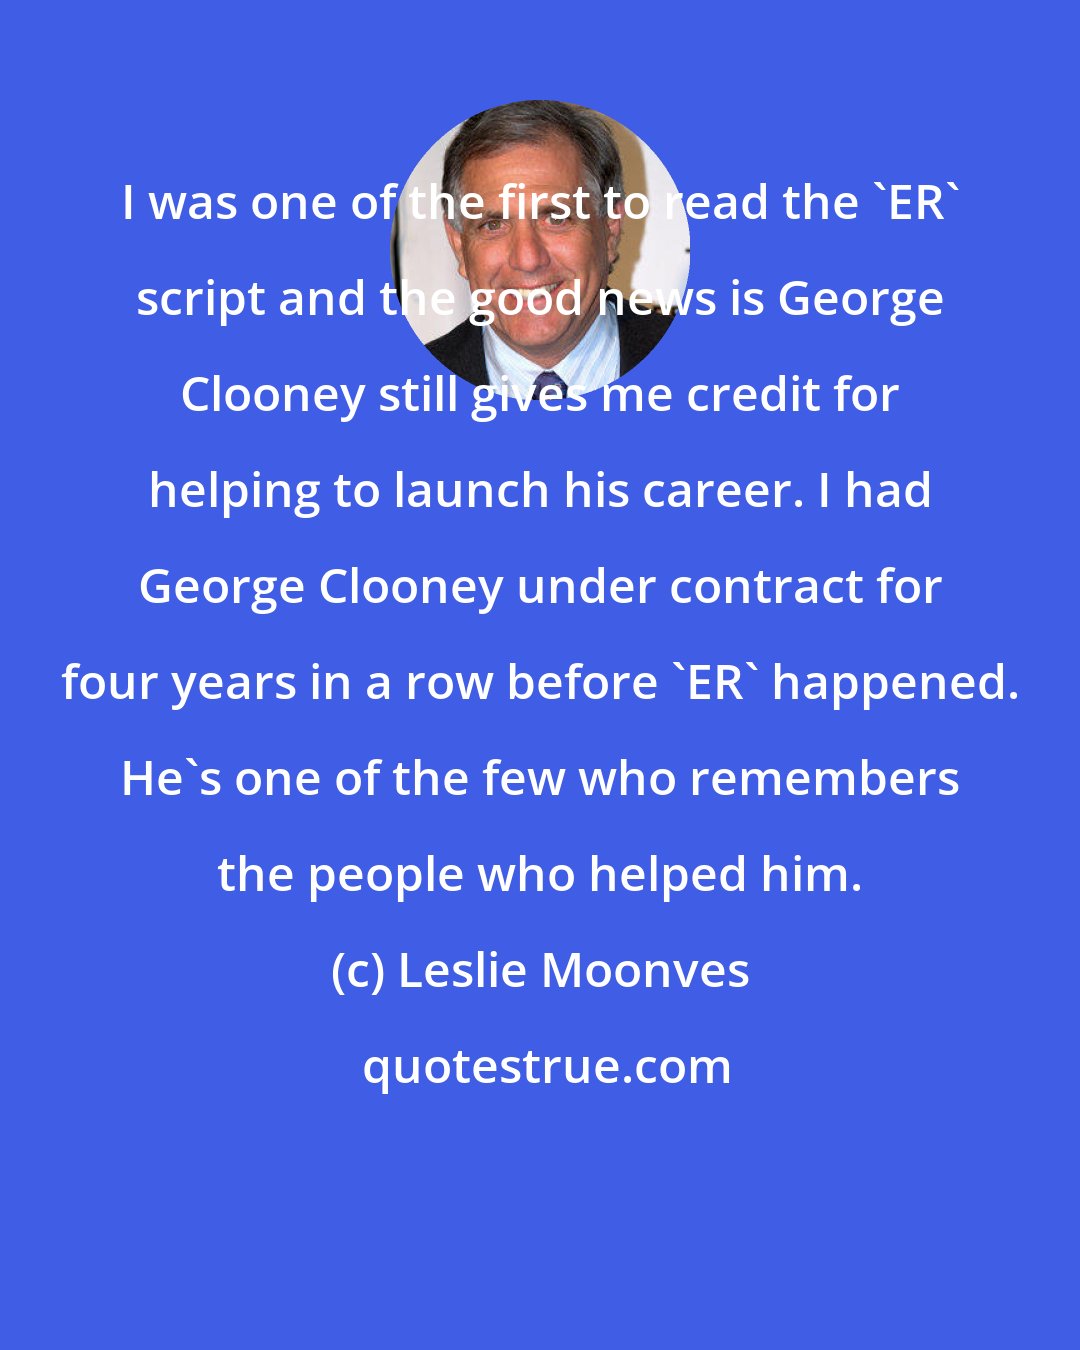 Leslie Moonves: I was one of the first to read the 'ER' script and the good news is George Clooney still gives me credit for helping to launch his career. I had George Clooney under contract for four years in a row before 'ER' happened. He's one of the few who remembers the people who helped him.